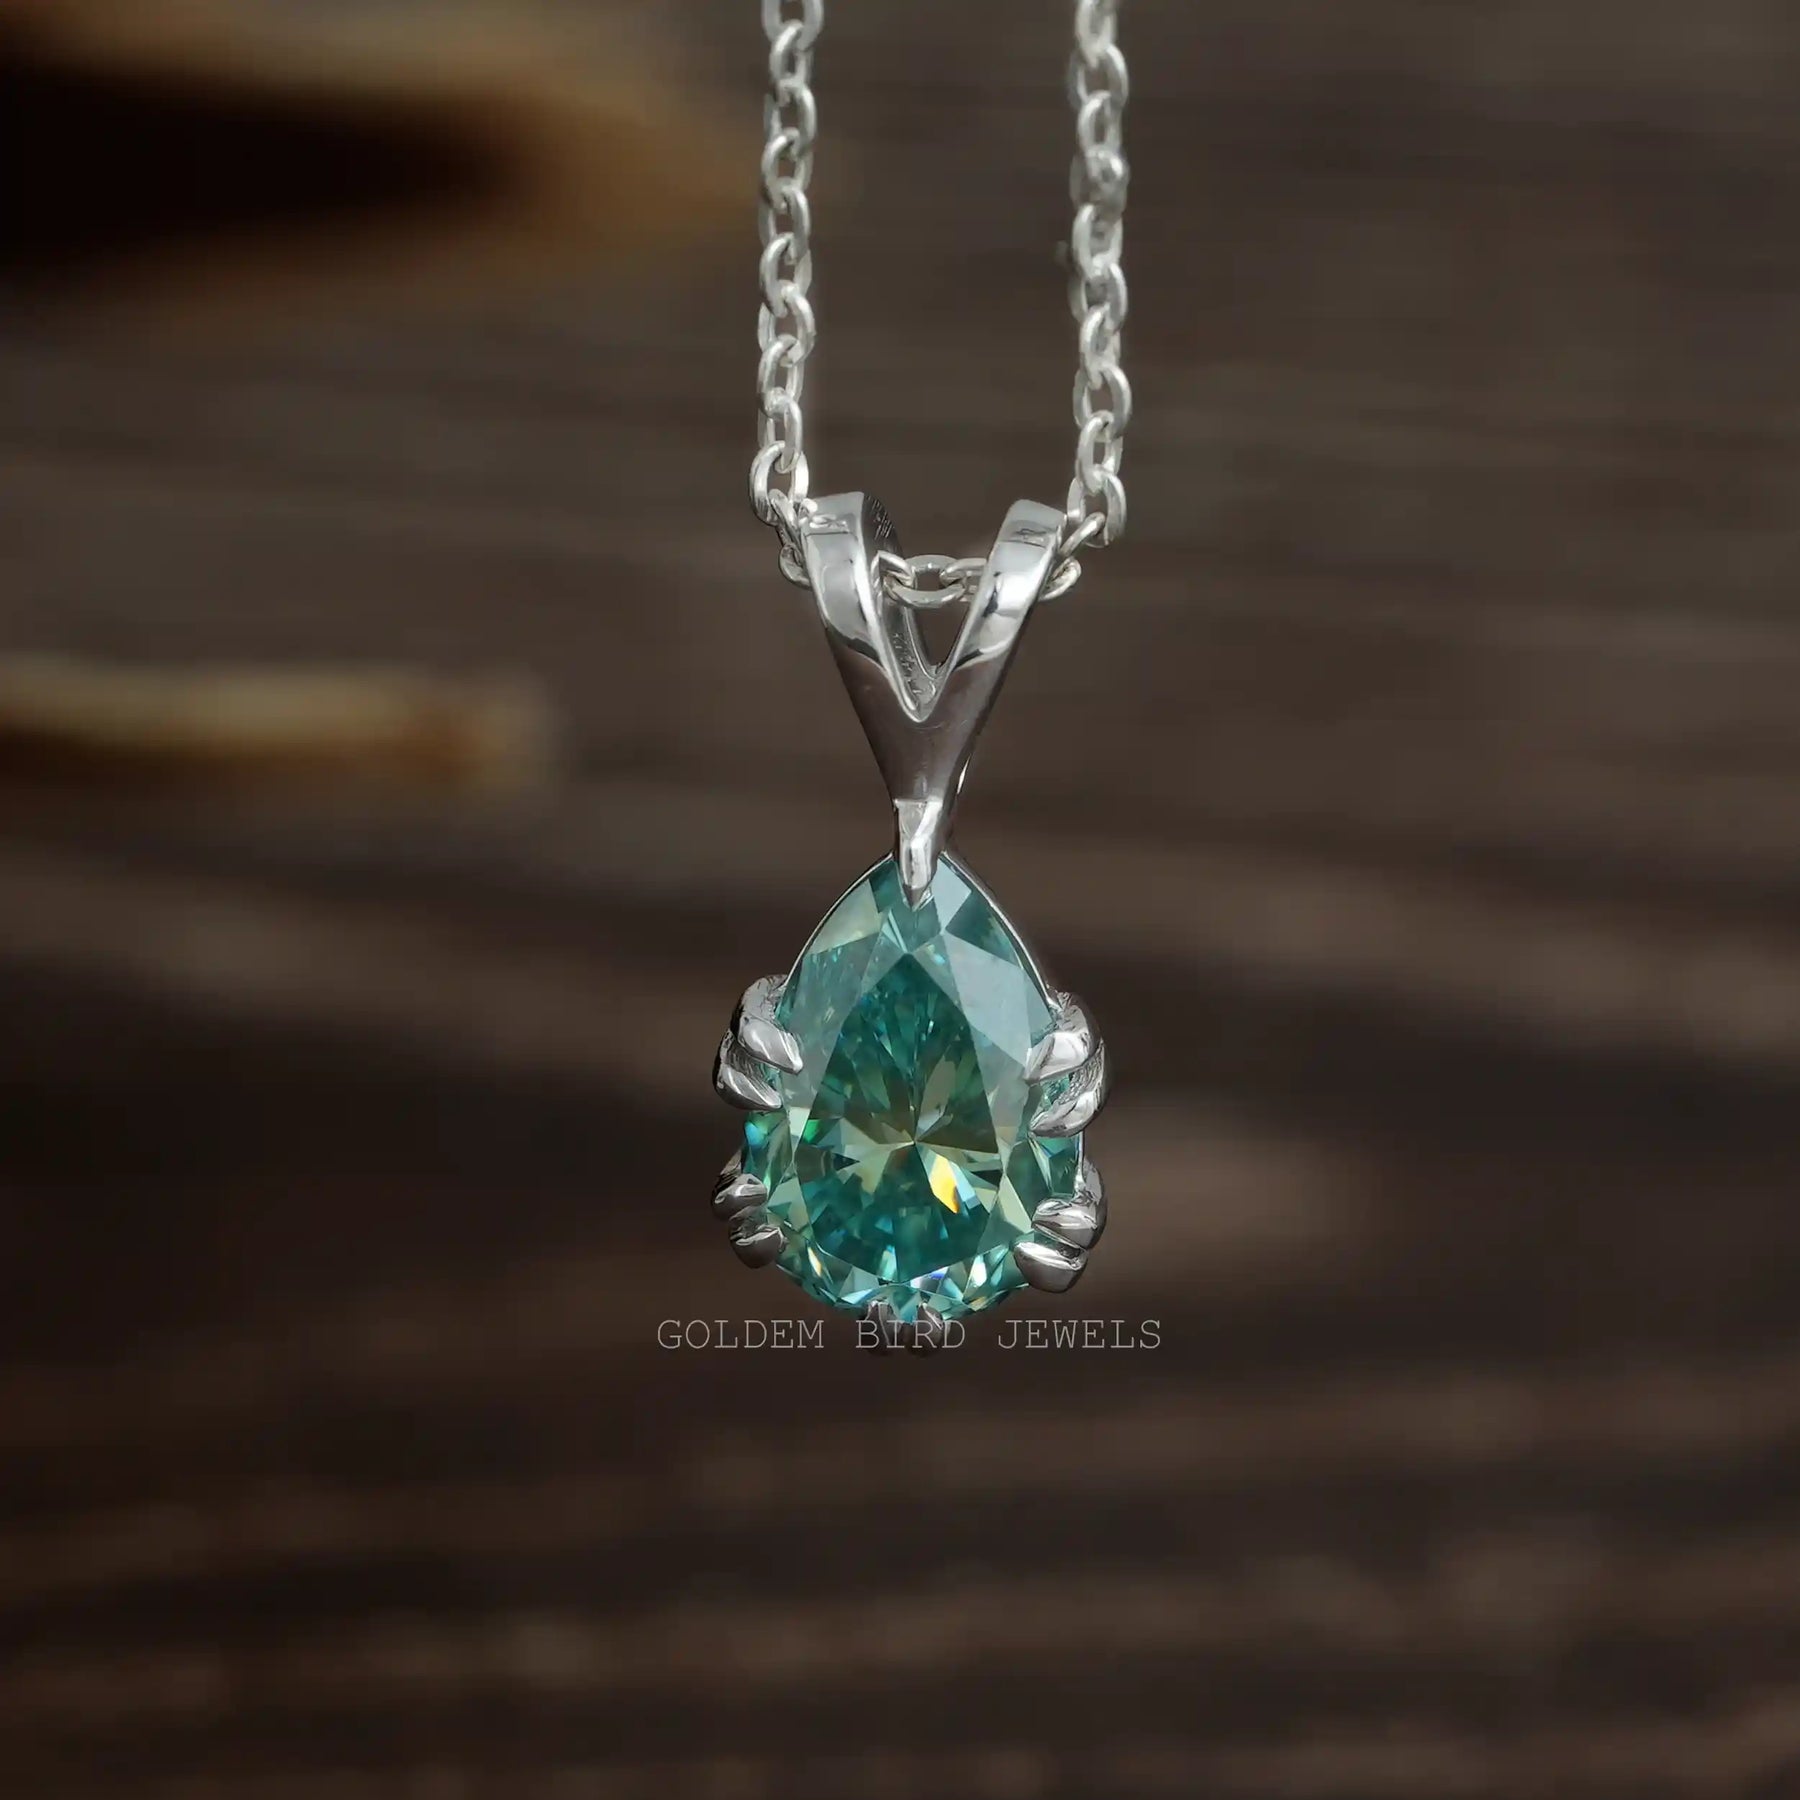 [Front view of blue pear cut moissanite pendant made of double claw setting]-[Golden Bird Jewels]